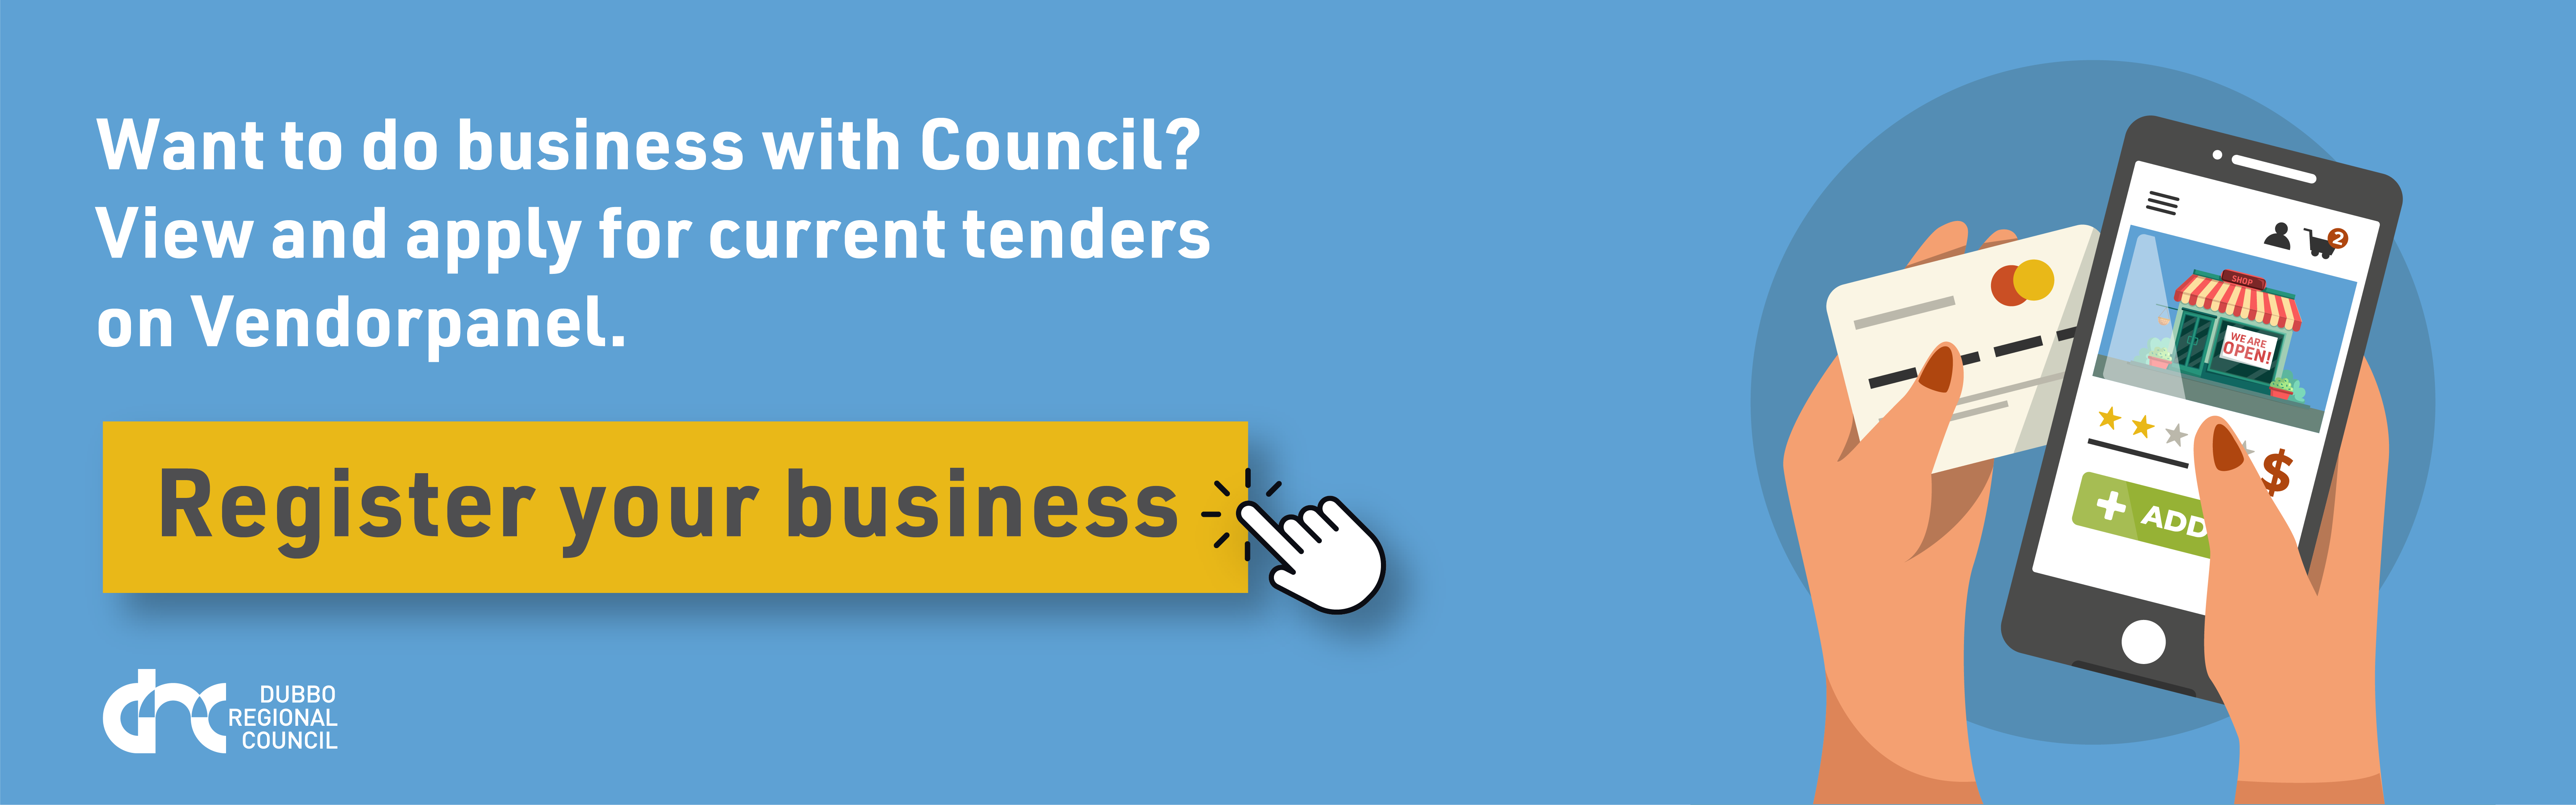 Register to view and apply for current tenders on Vendorpanel.